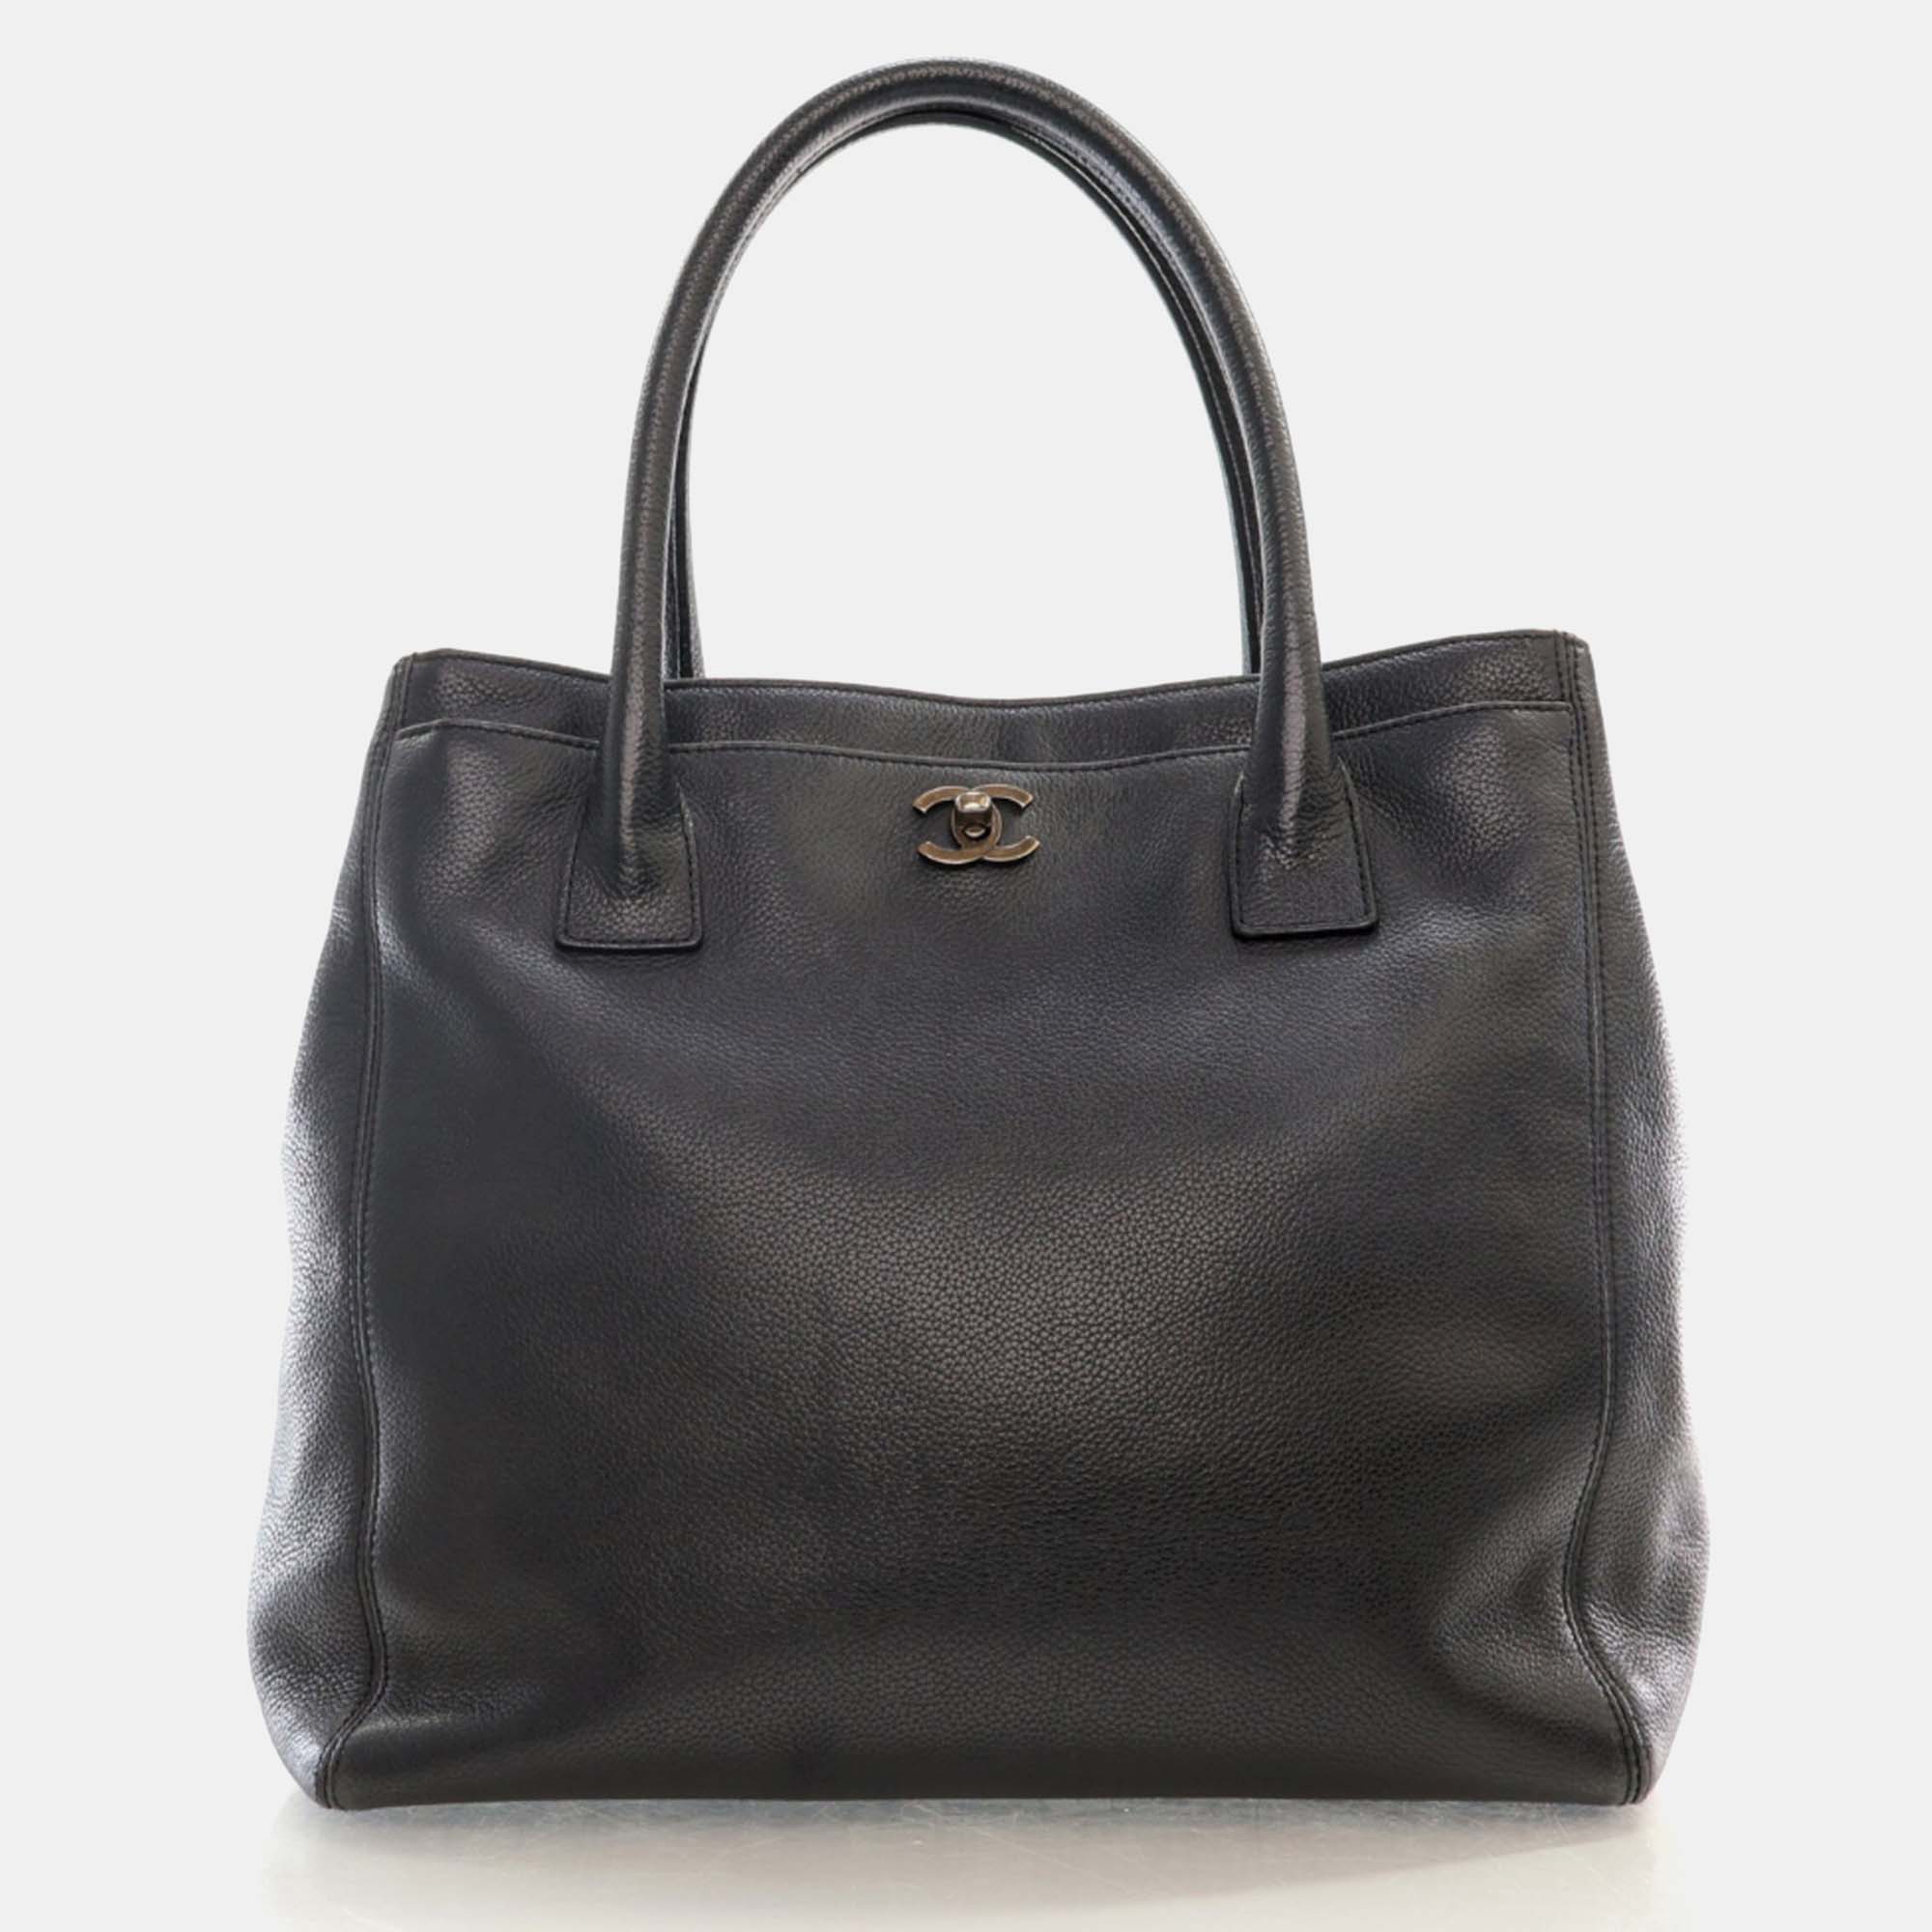 Chanel black leather executive tote bag